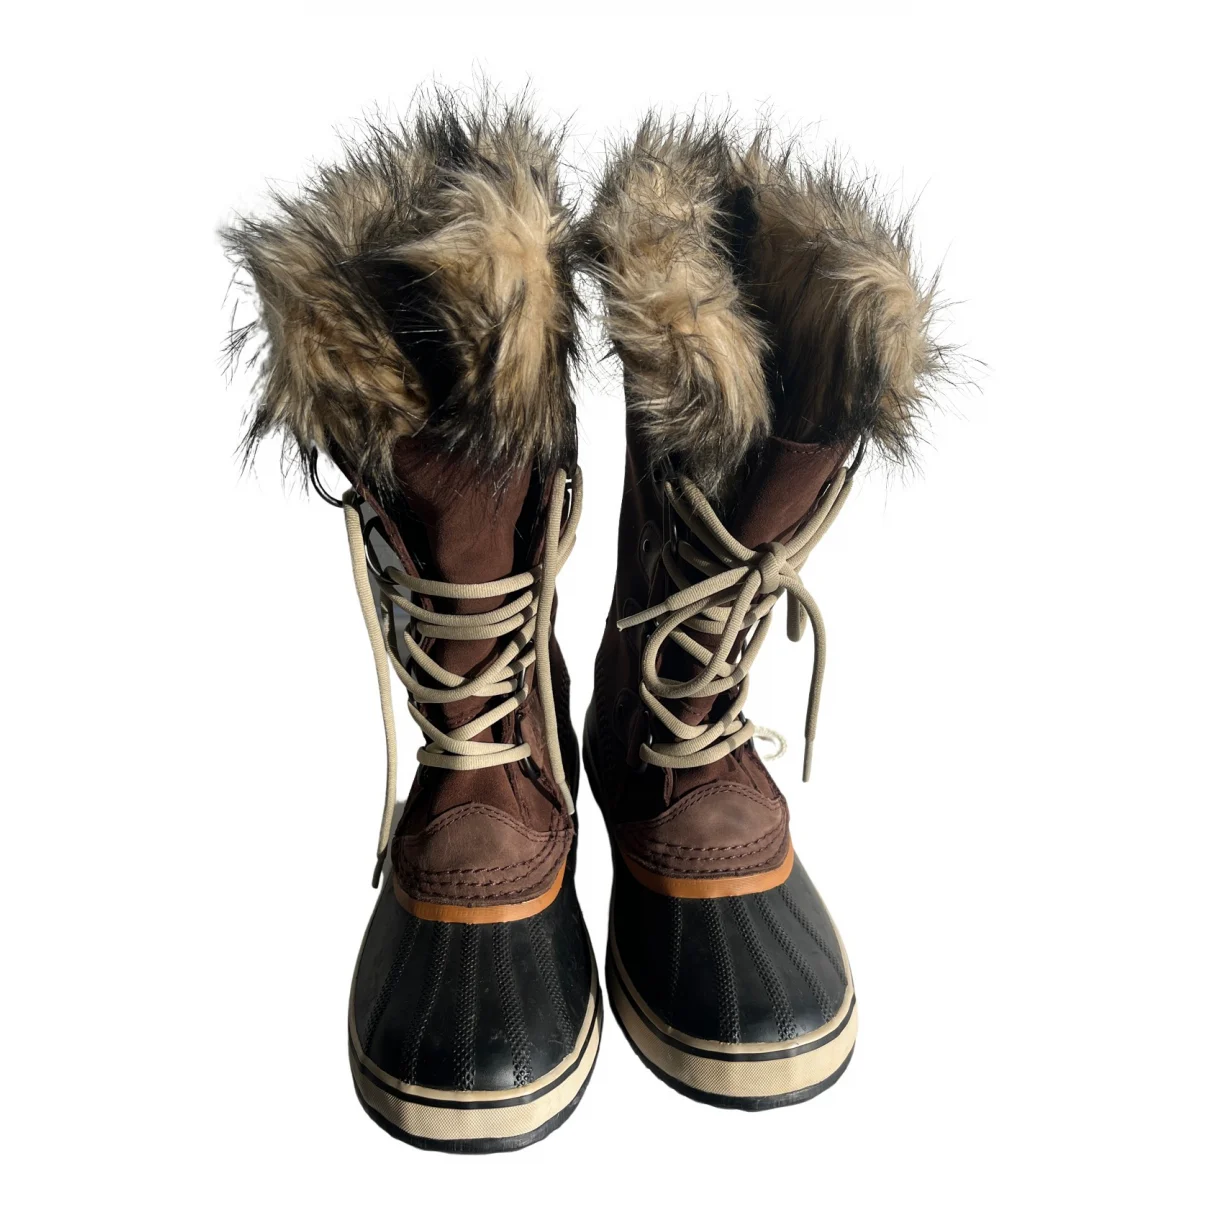 Boots Sorel Rubber for Female - We Do Adz